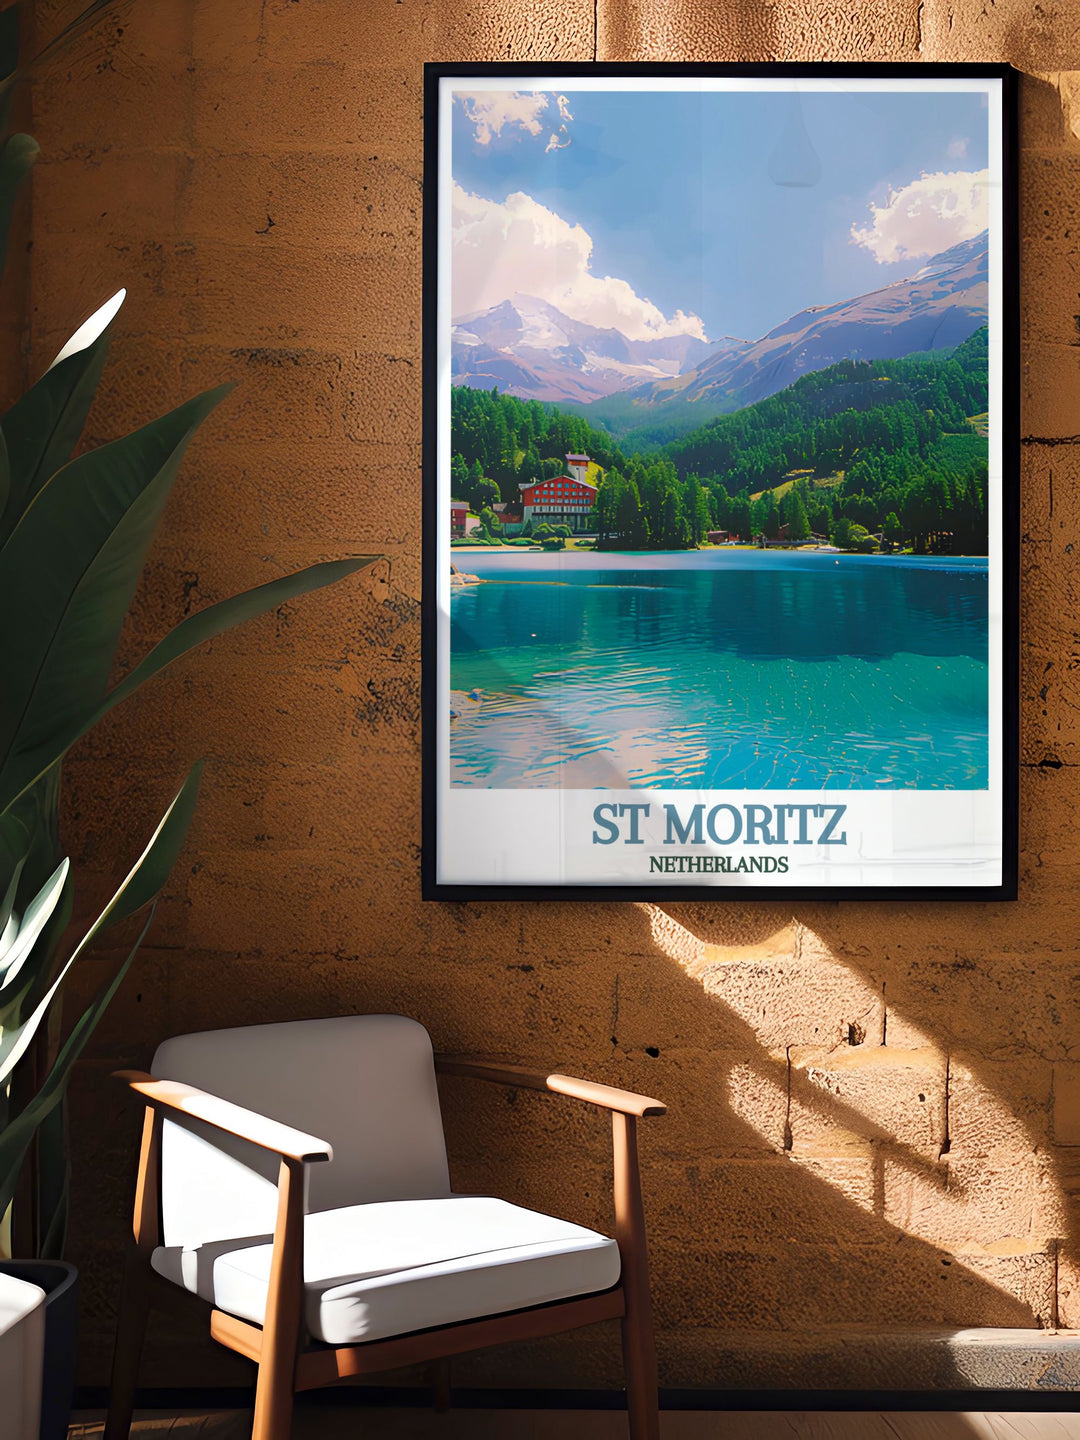 The elegant town of St Moritz and the stunning Lake St. Moritz are beautifully illustrated in this poster, celebrating the luxury and natural splendor of Switzerland.